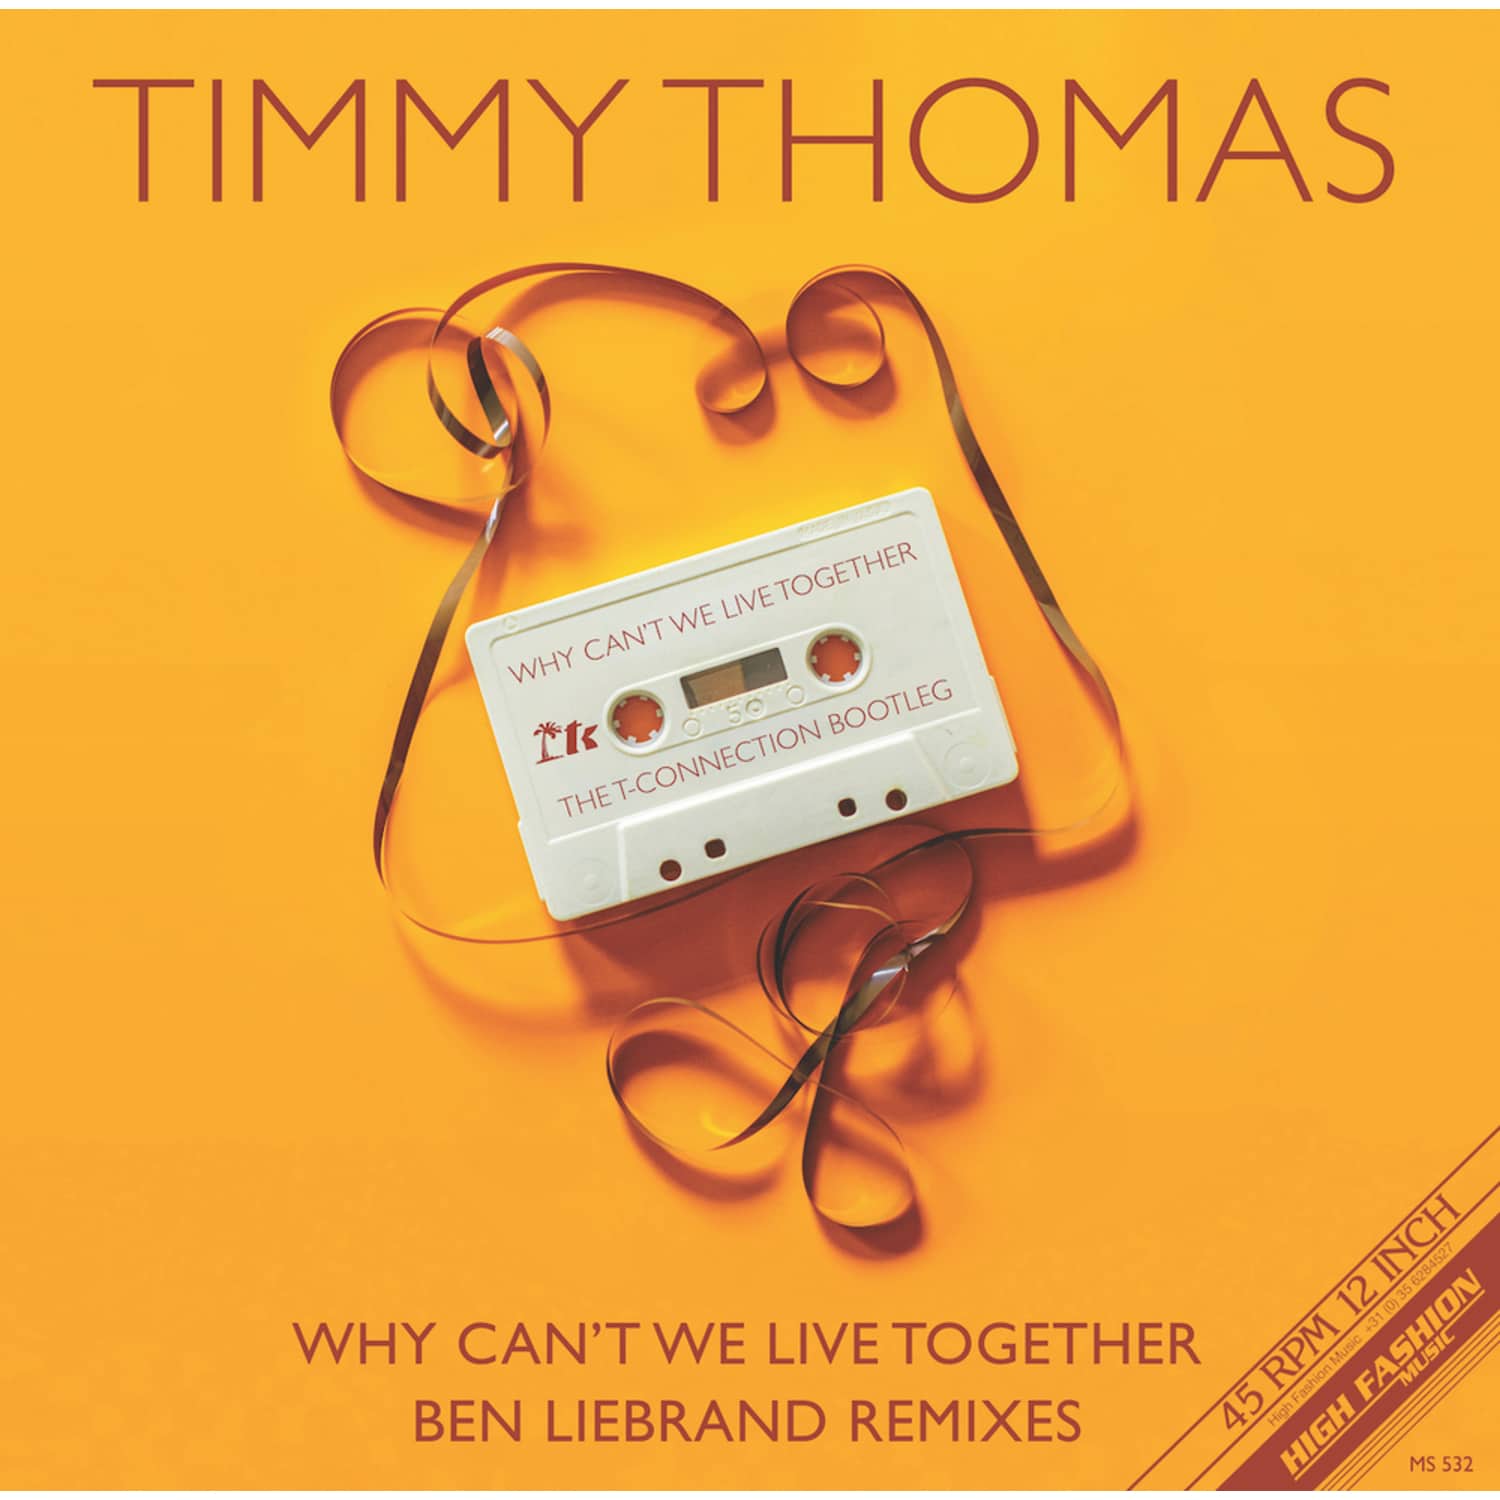 Timmy Thomas - WHY CANT WE LIVE TOGETHER 